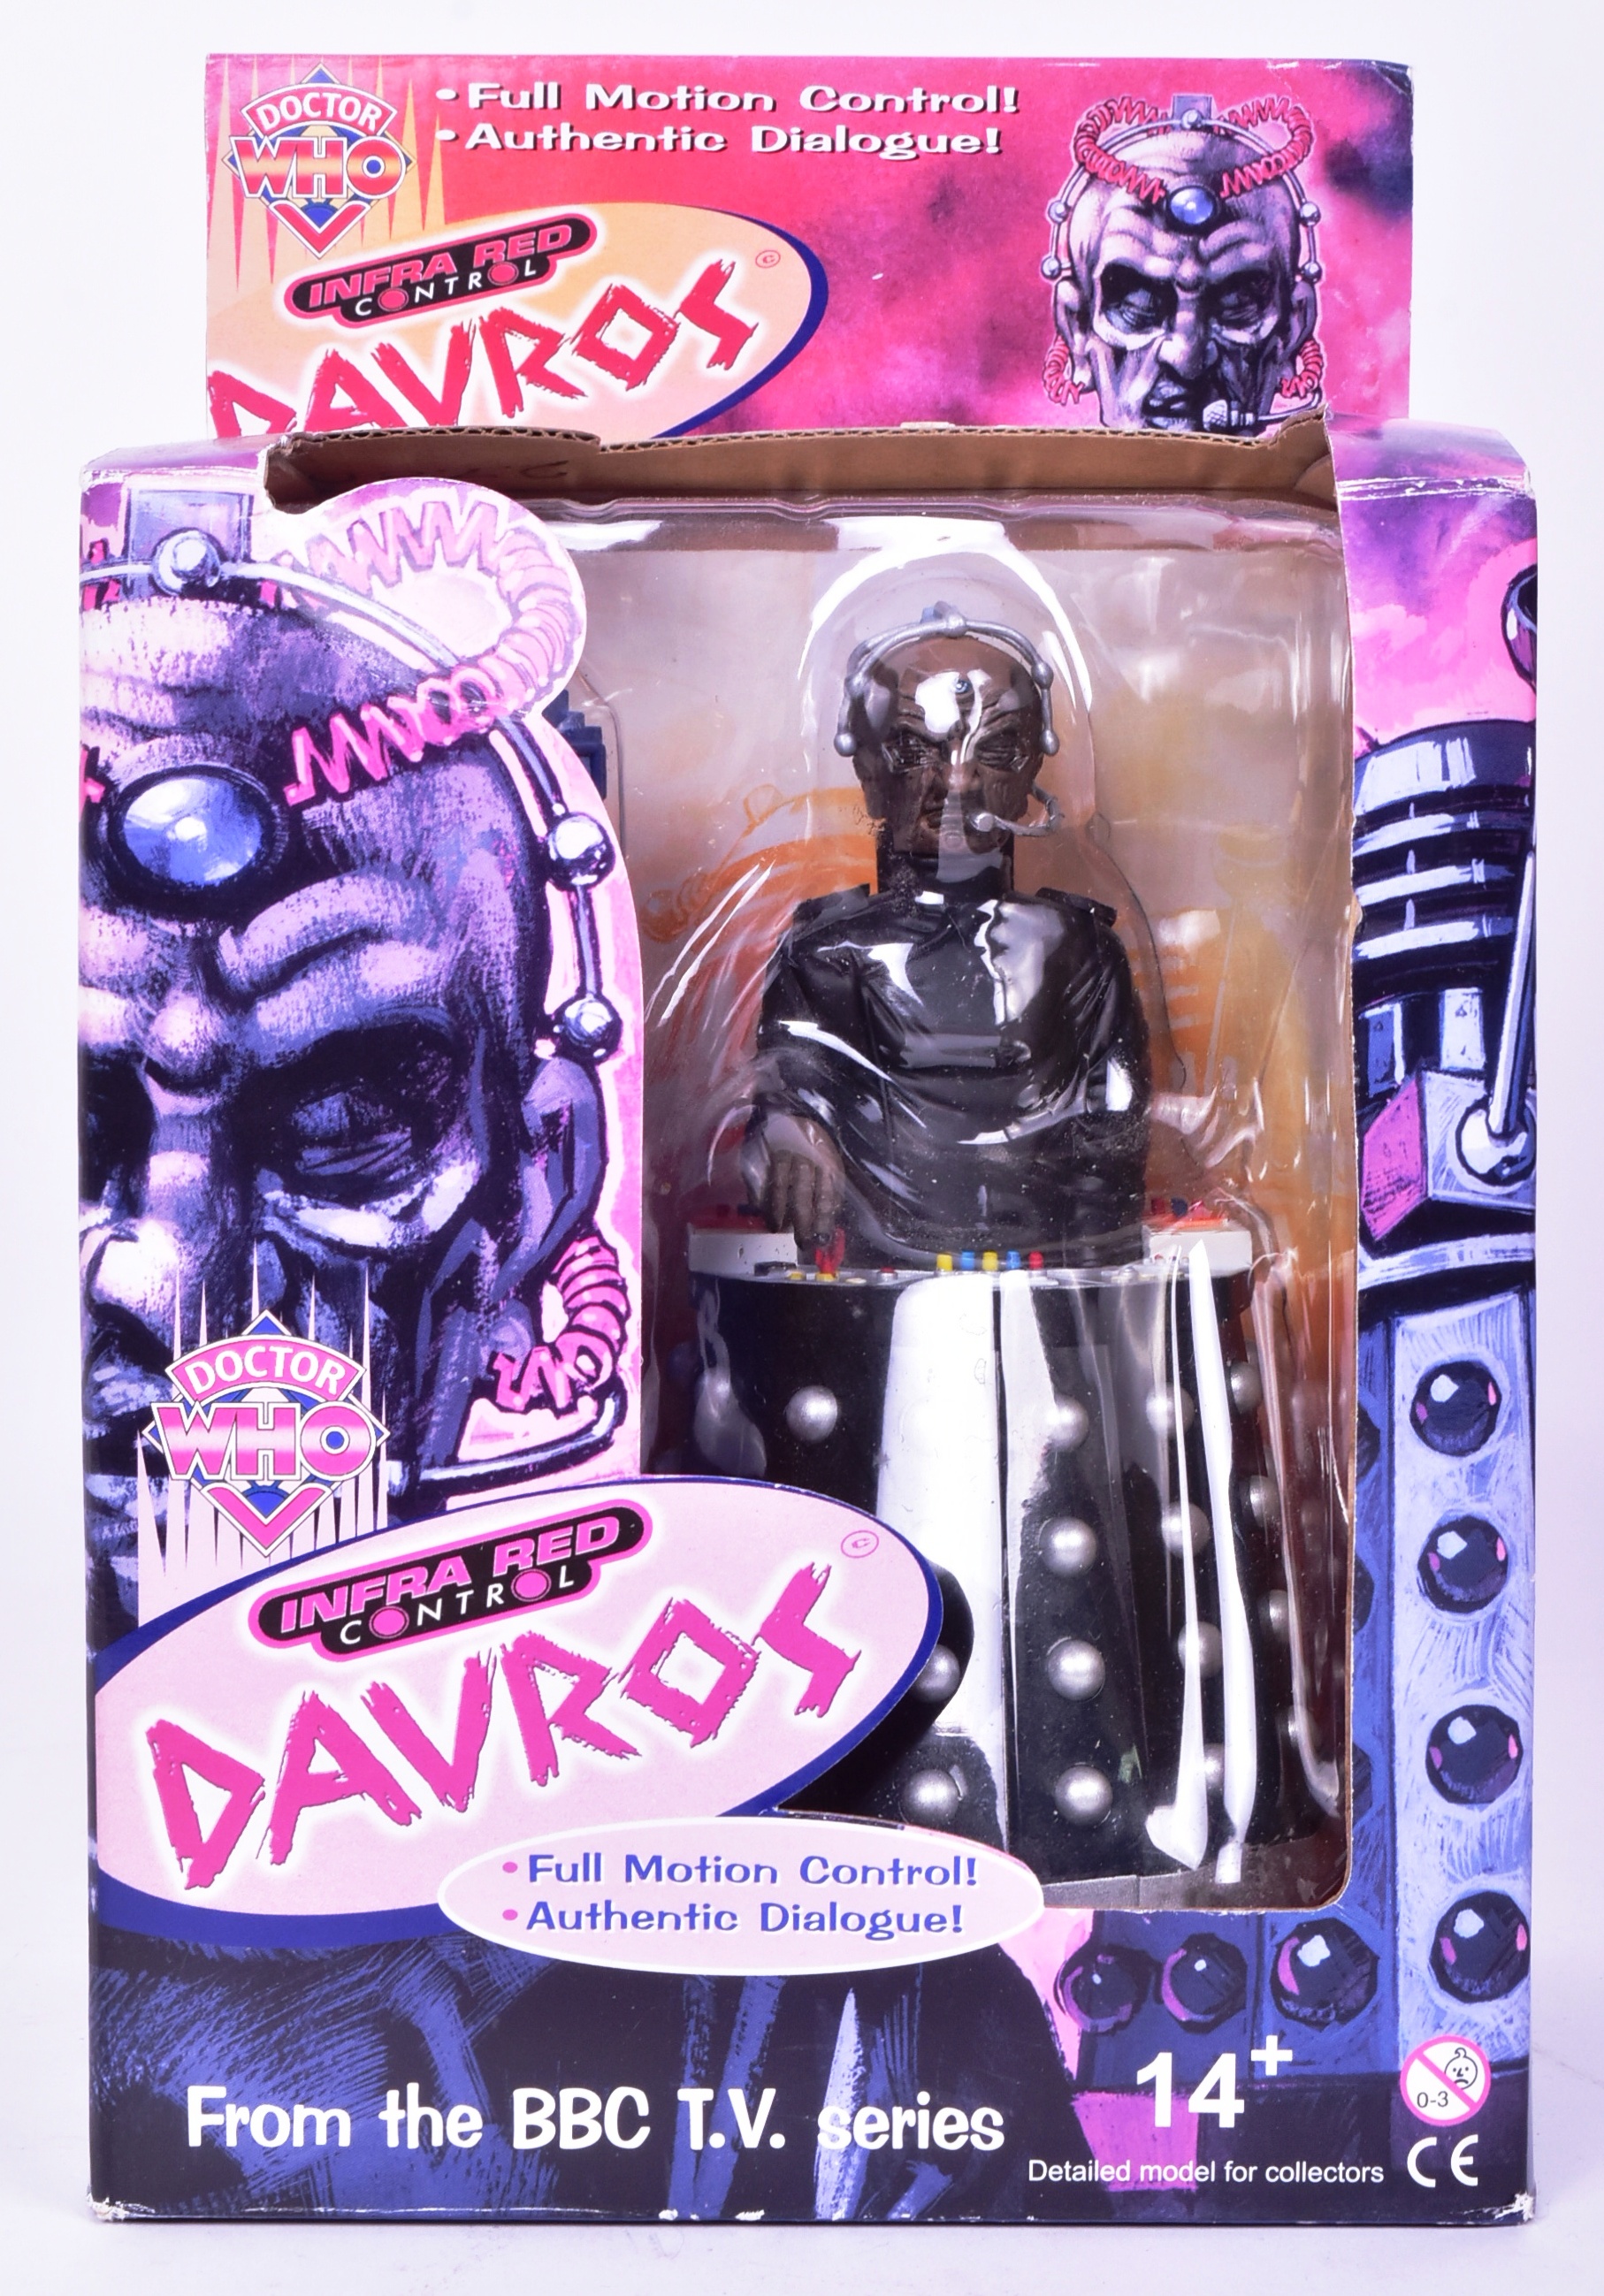 DOCTOR WHO - PRODUCT ENTERPRISE - INFRA-RED CONTROL DAVROS - Image 2 of 5